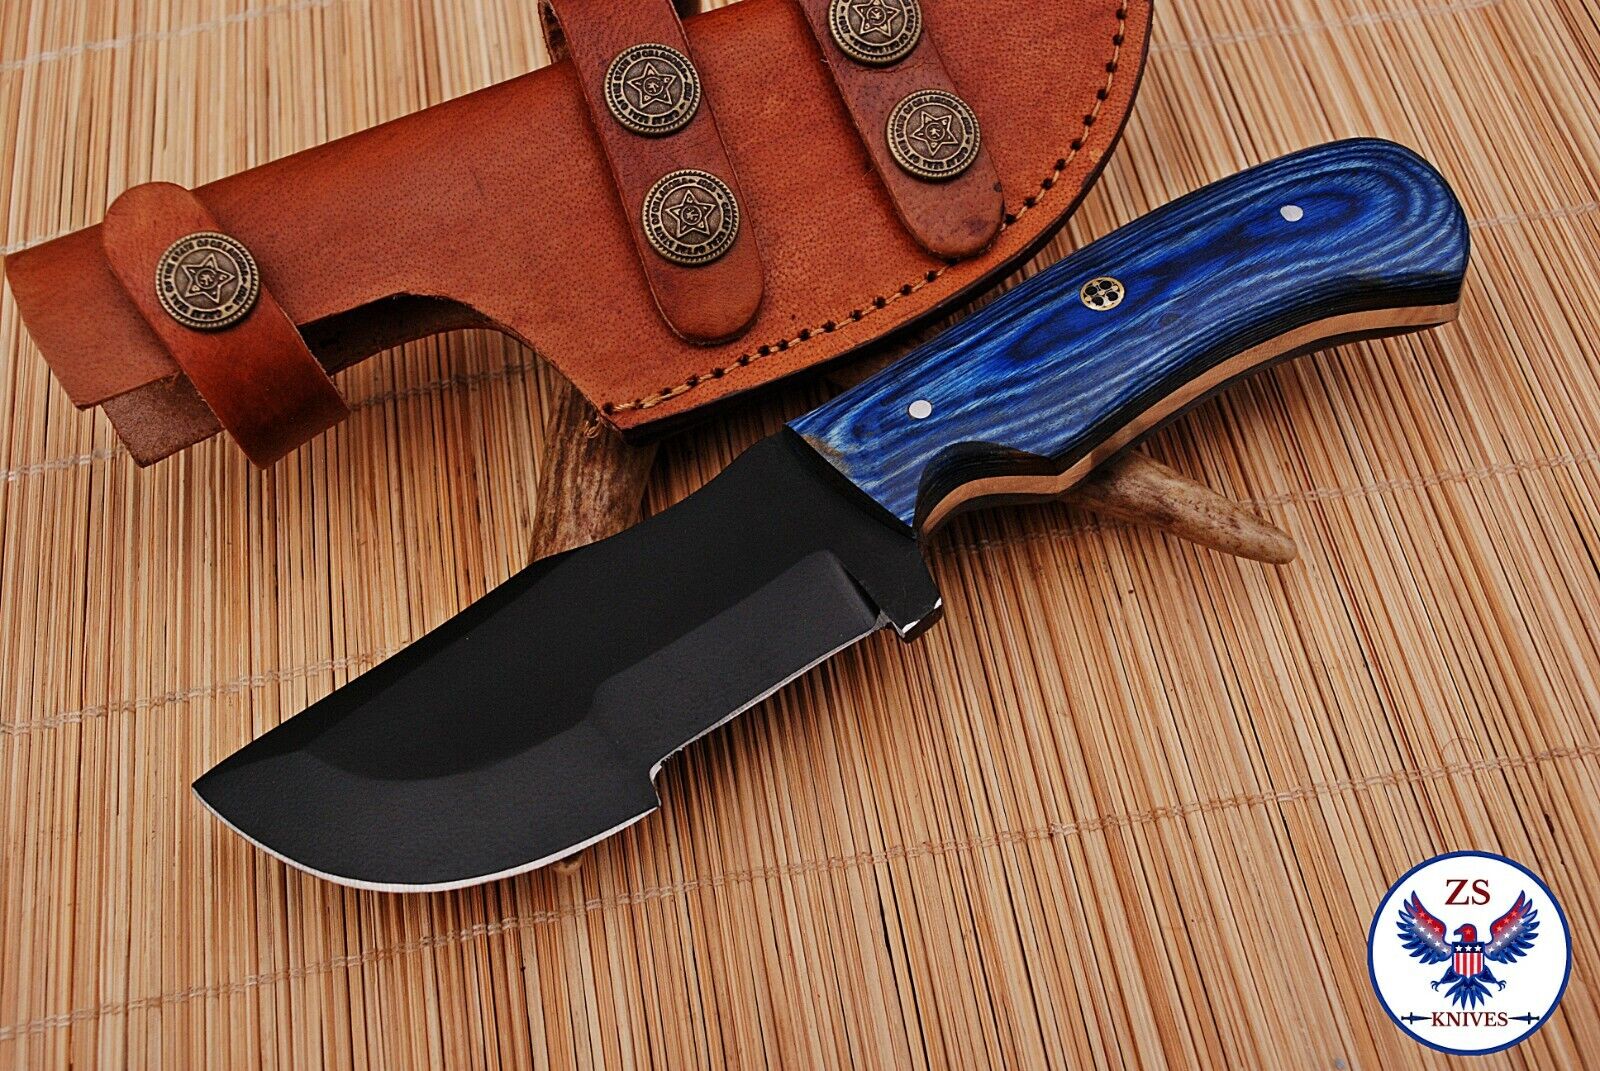 TRACKER 1095 CARBON STEEL TRACKER HUNTING KNIFE WITH WOOD HANDLE - ZS 81